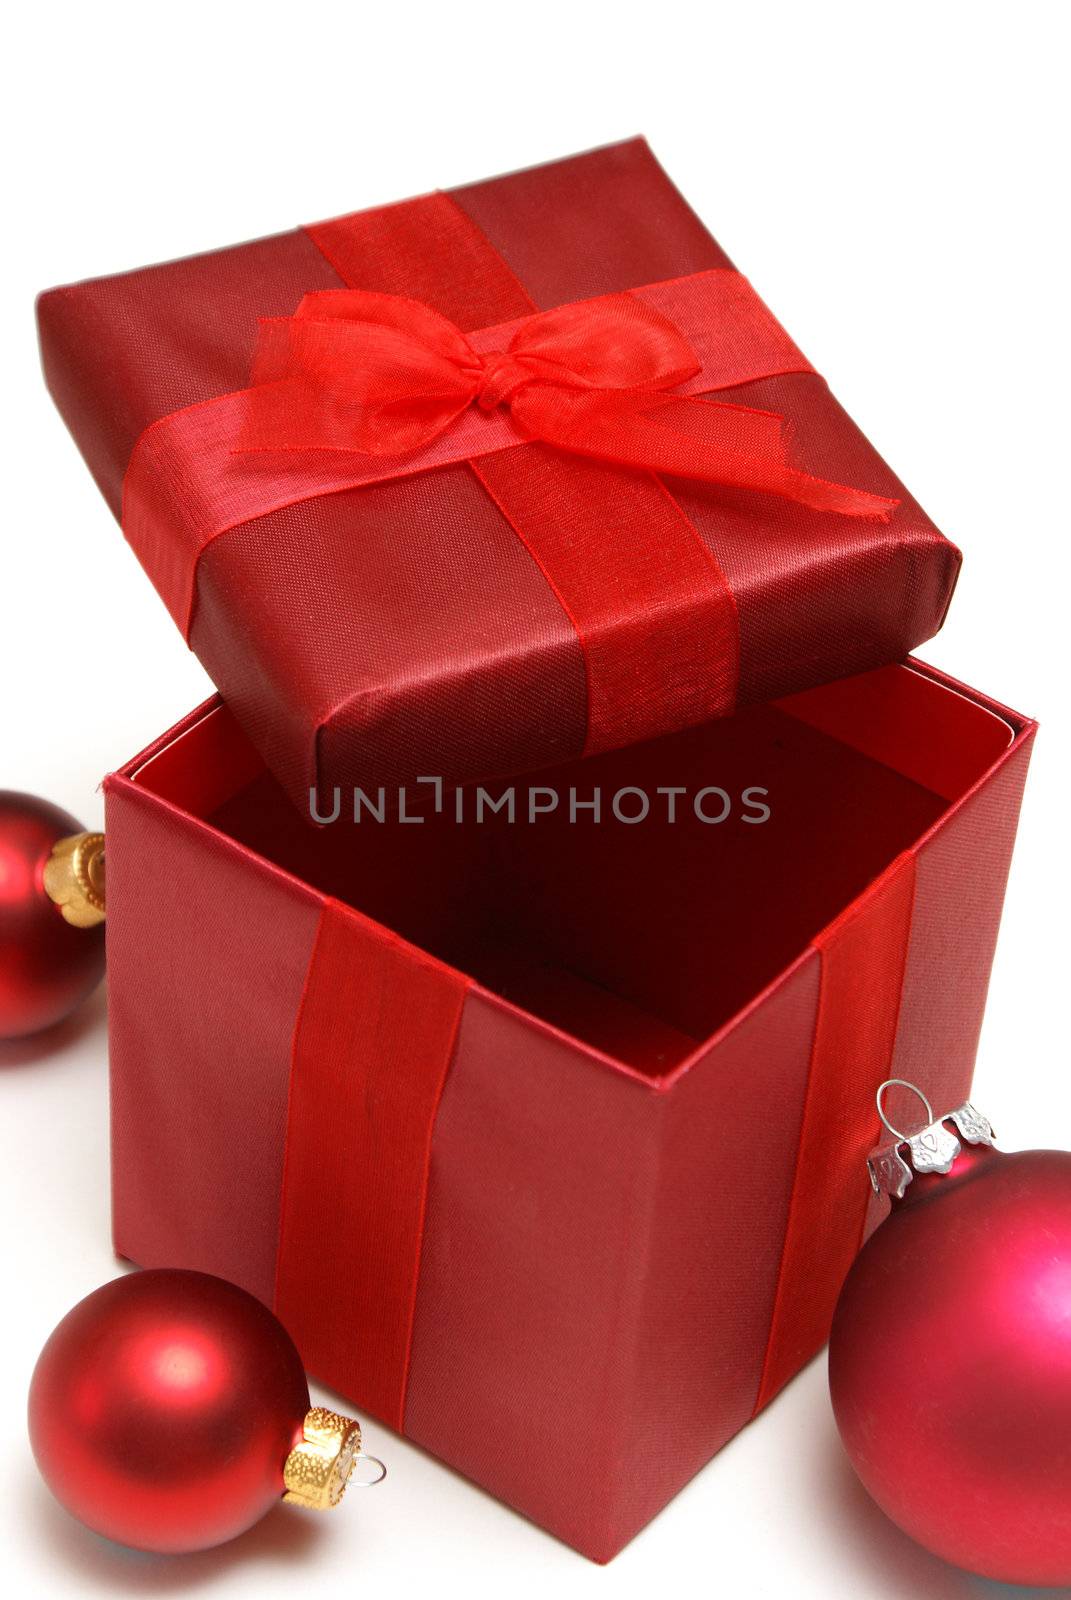 An open gift box for the holiday season.